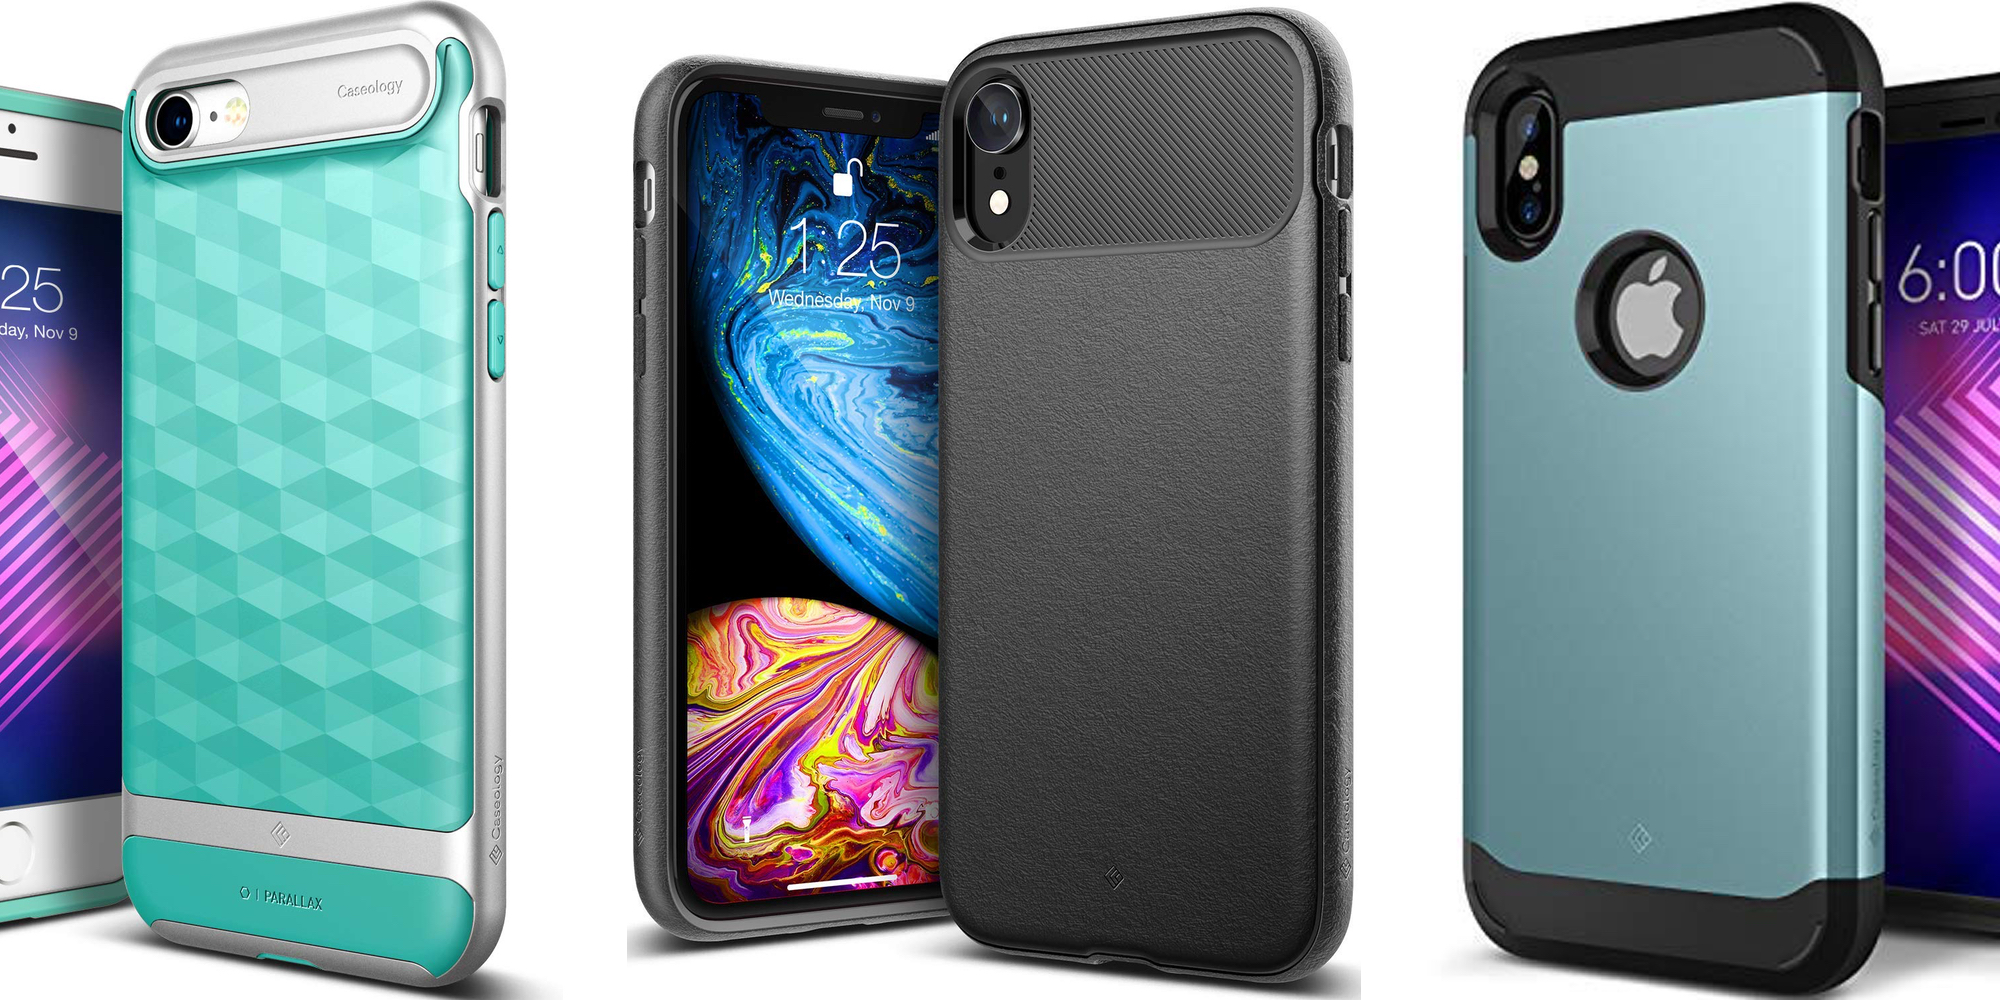 Wrap your iPhone XS/R/8/7/Plus in a stylish new case starting at $4 shipped